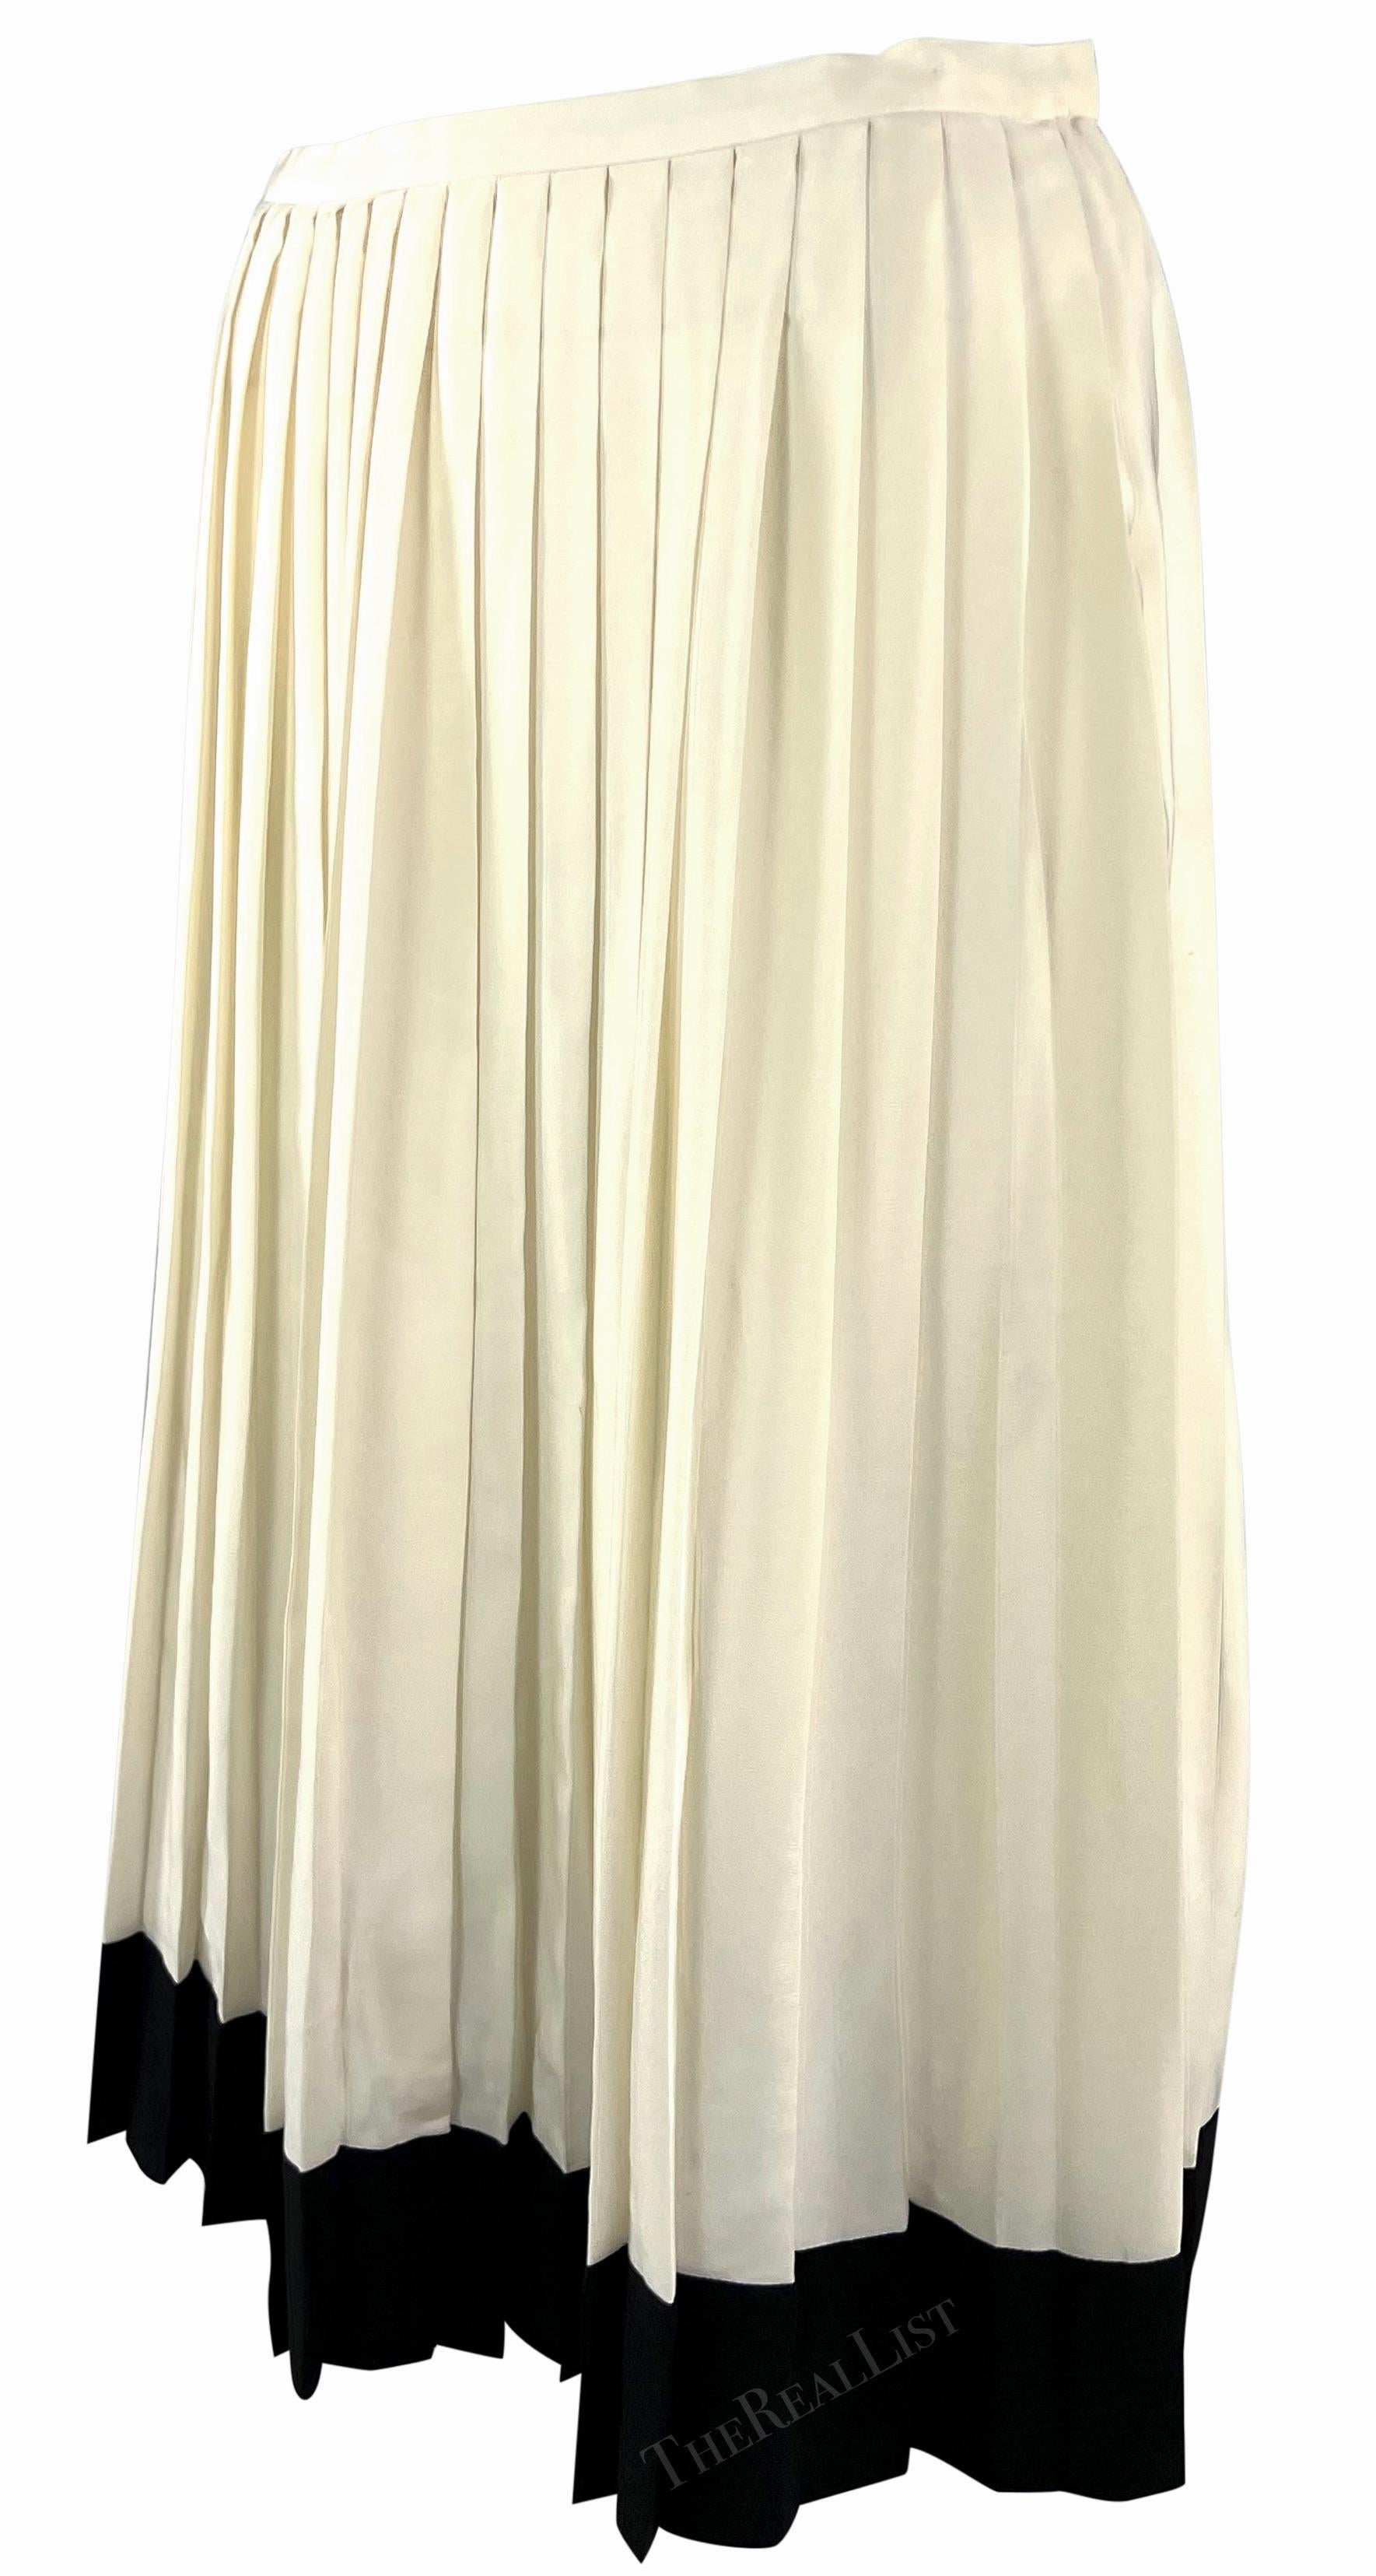 S/S 2001 Ralph Lauren Runway Creme Black Pleated Silk Tennis Skirt In Excellent Condition For Sale In West Hollywood, CA